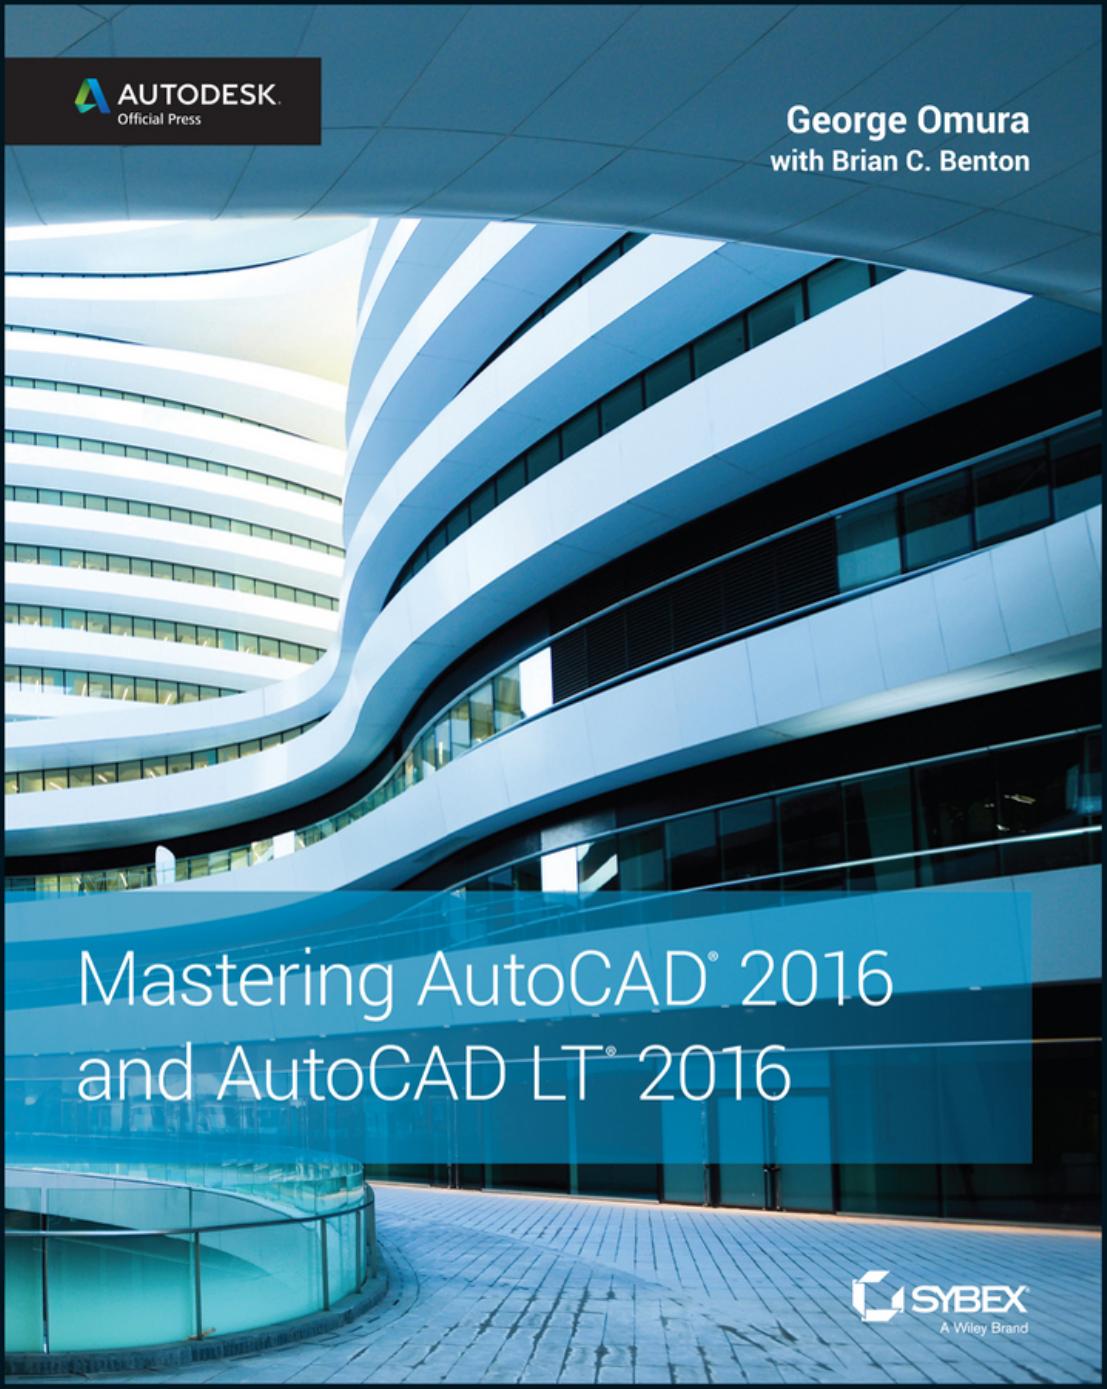 Mastering AutoCAD 2016 and AutoCAD LT 2016 Autodesk Official Press.jpg